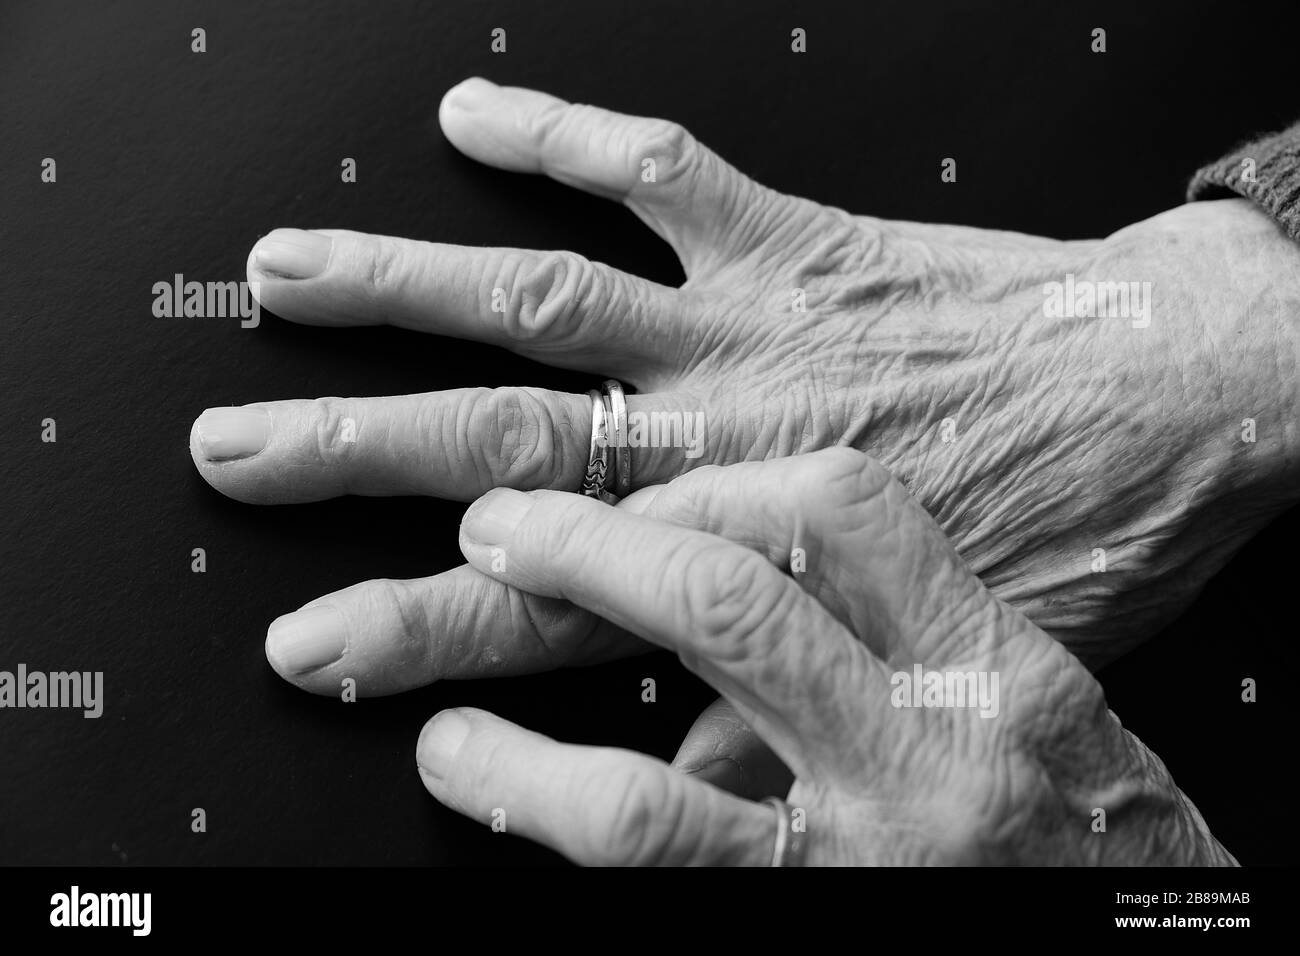 elderly woman's hand with a ring on her finger, old woman's hand and fingers, Stock Photo